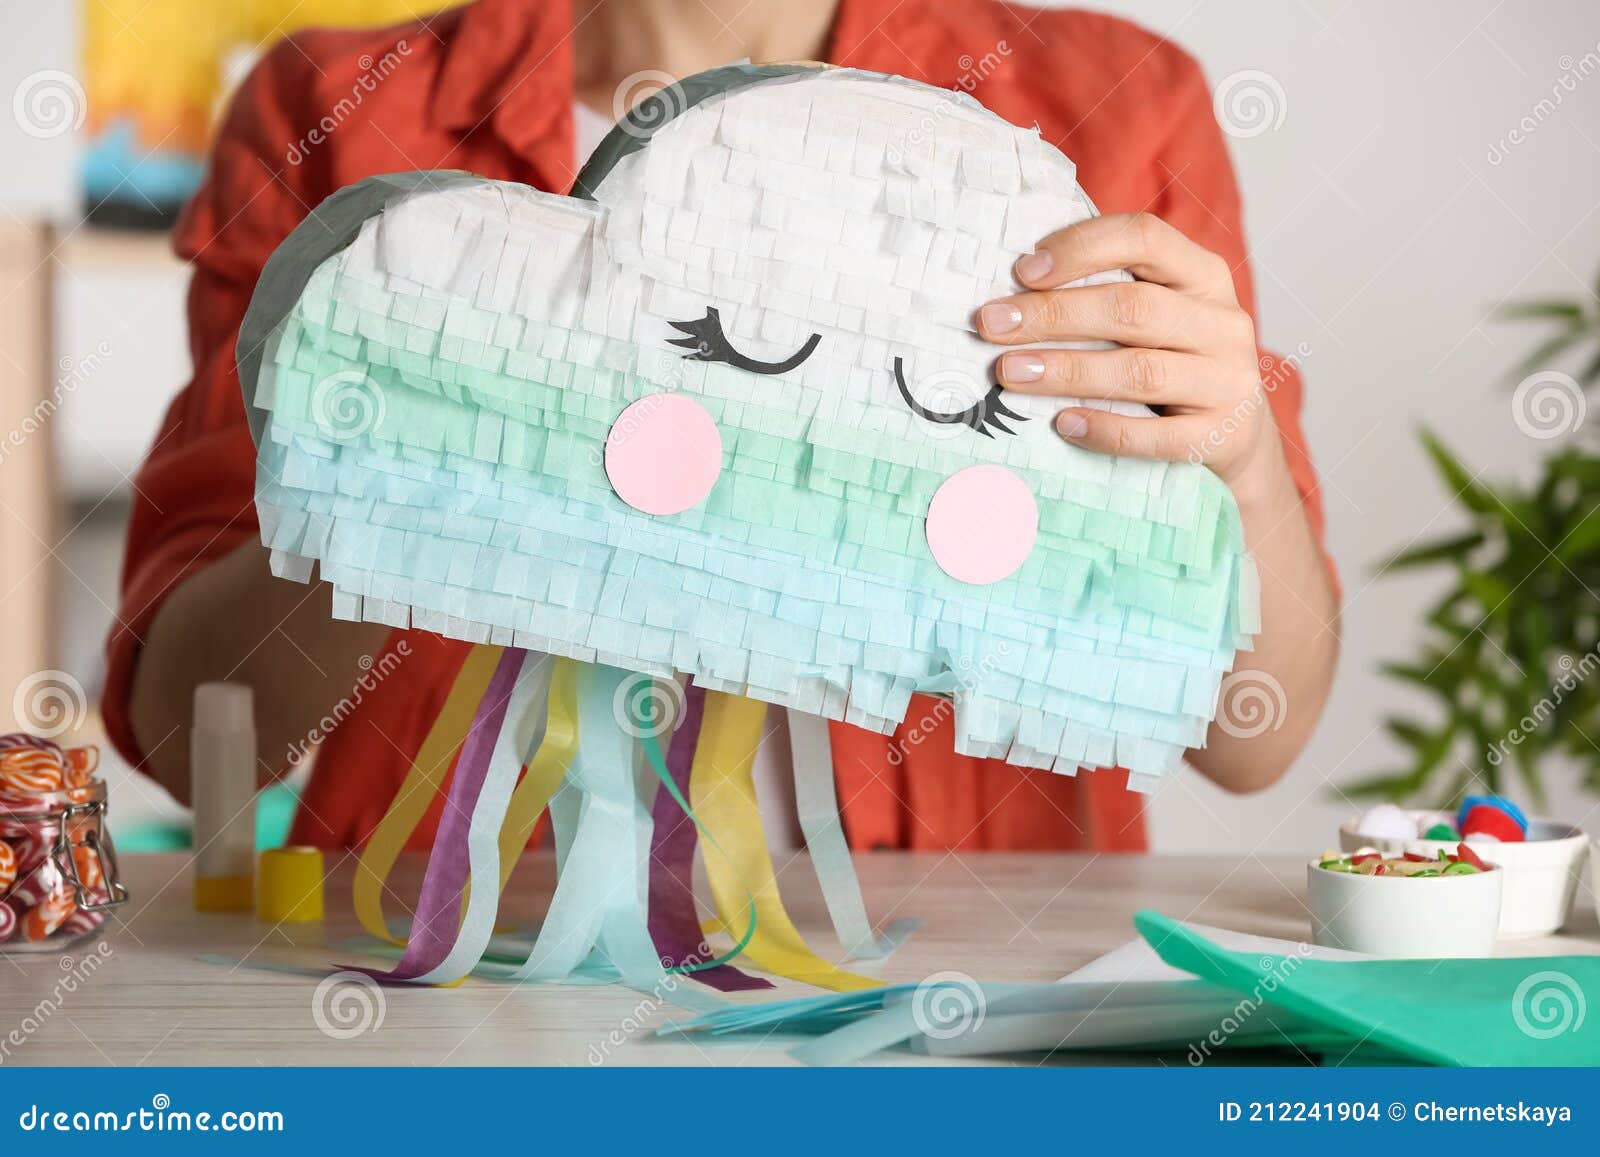 Woman Making Cardboard Cloud at White Wooden Table, Closeup